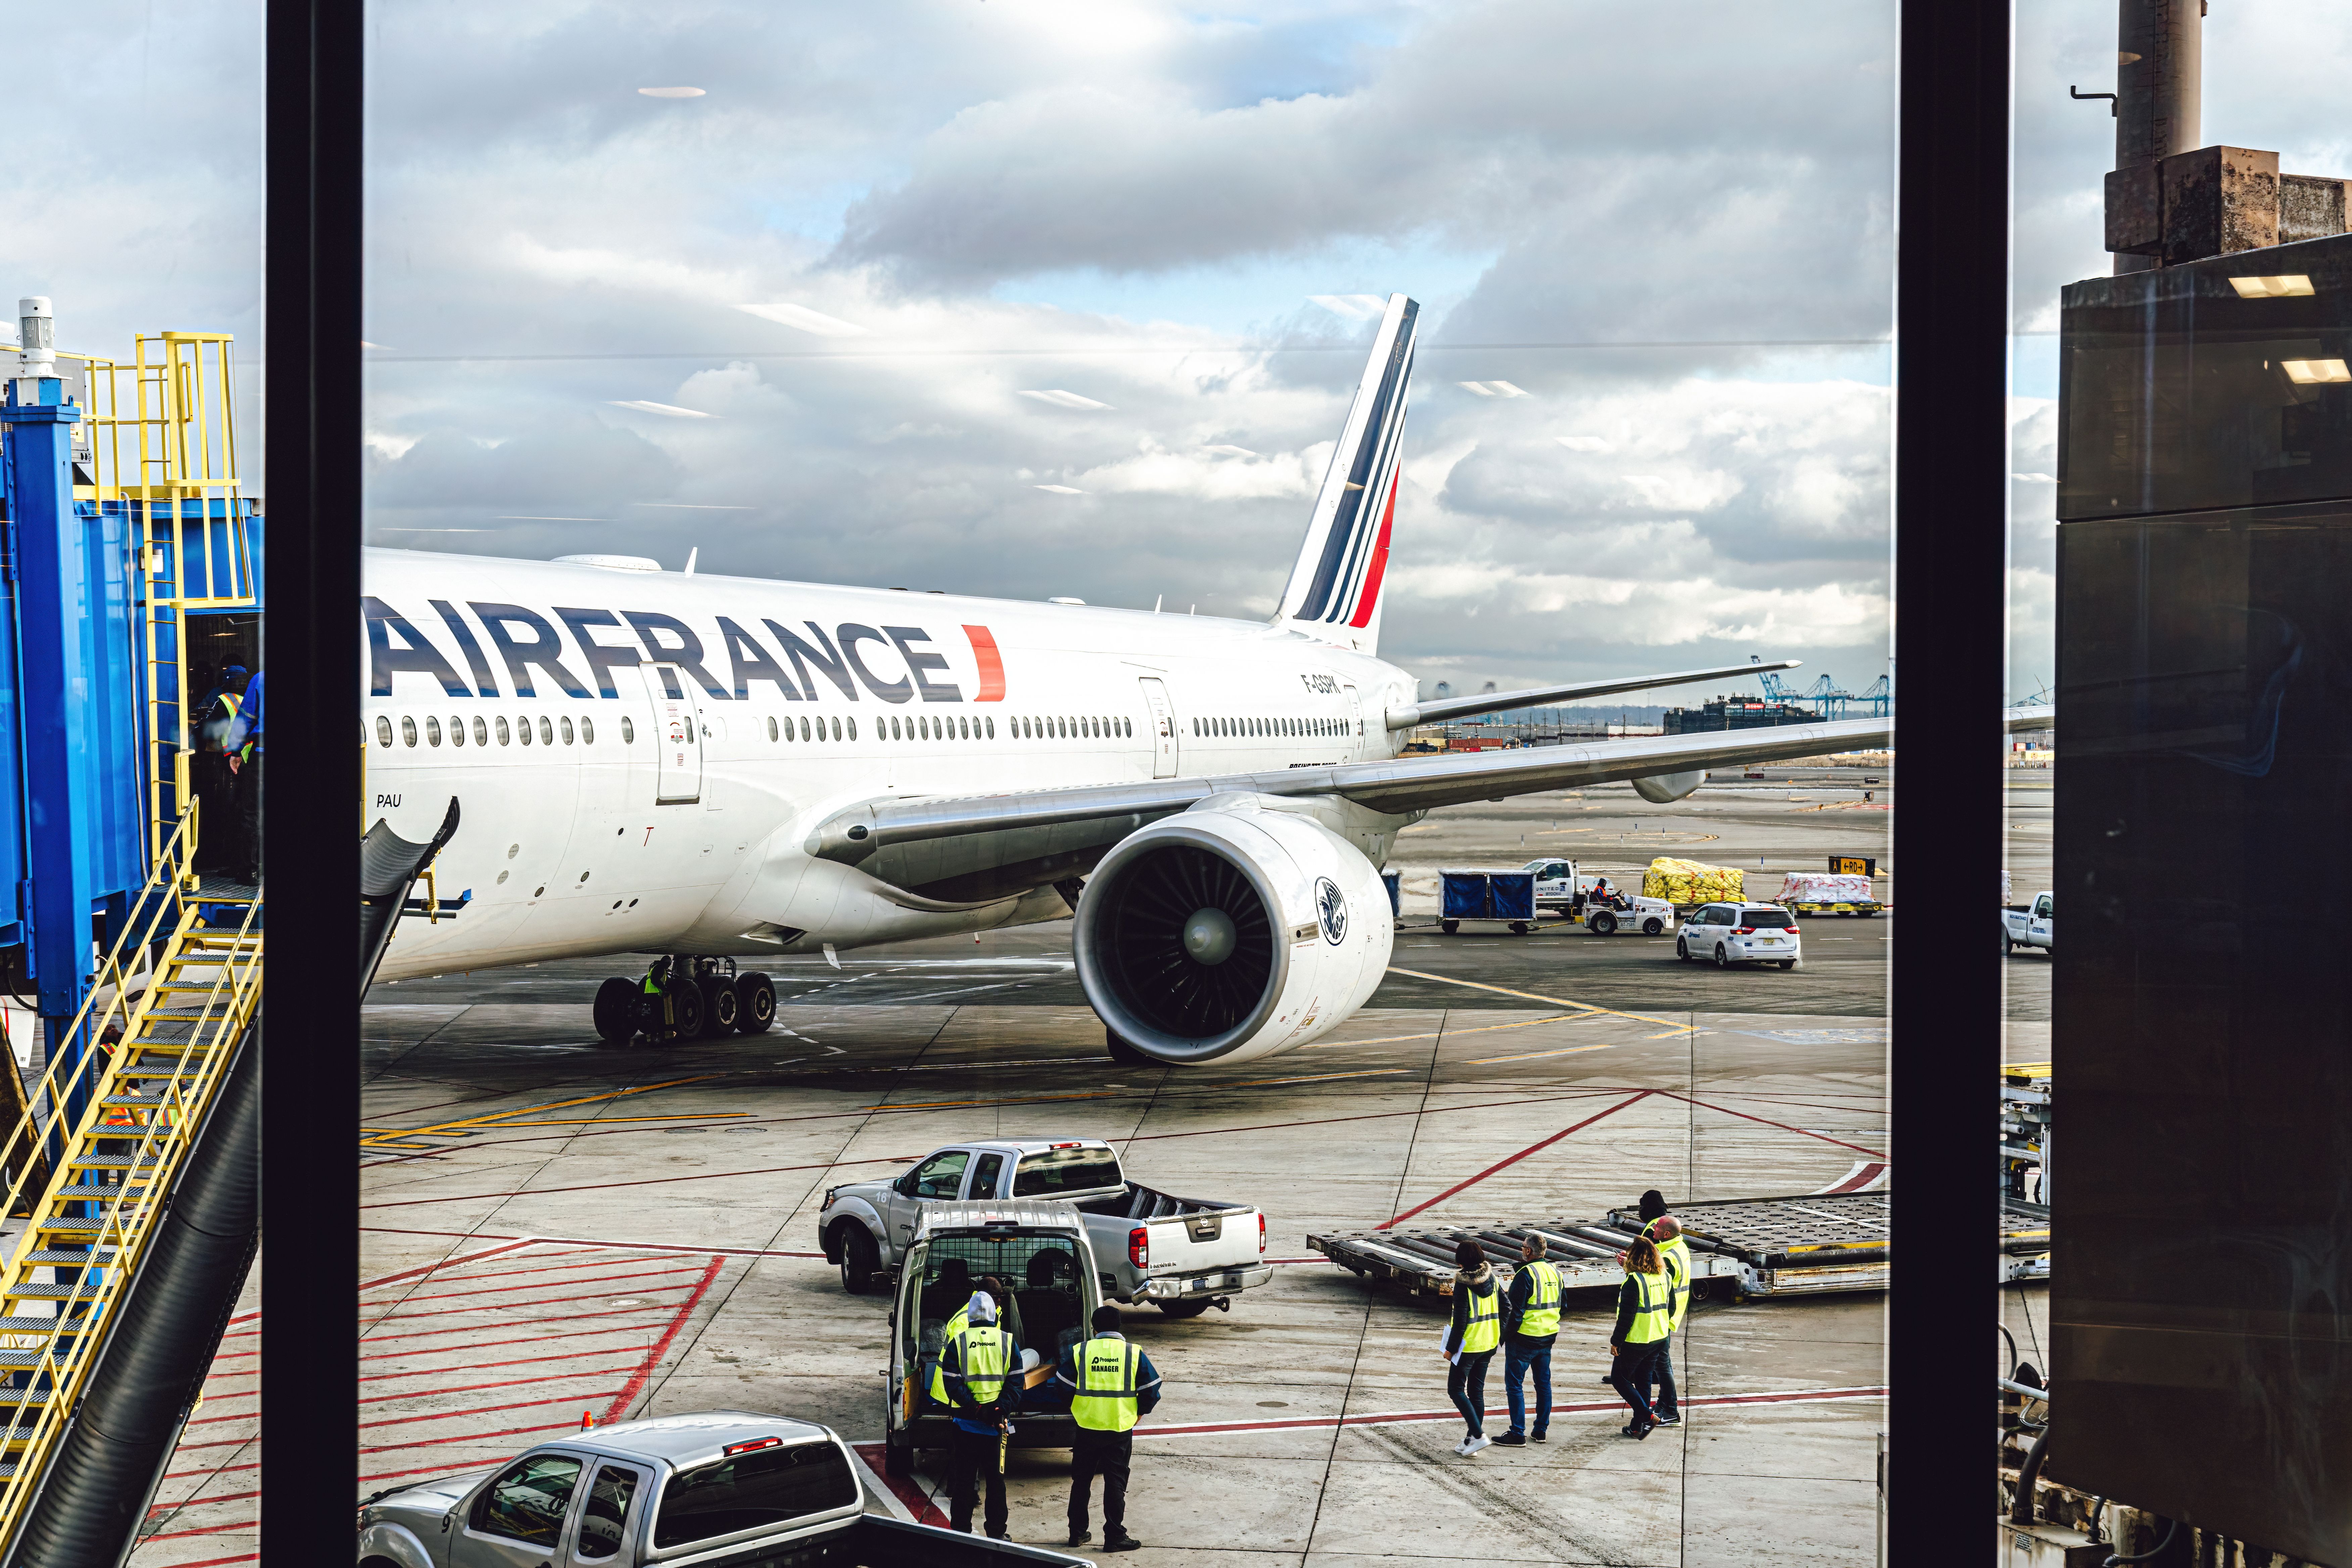 Air France Boeing 777-200ER at the gate in EWR